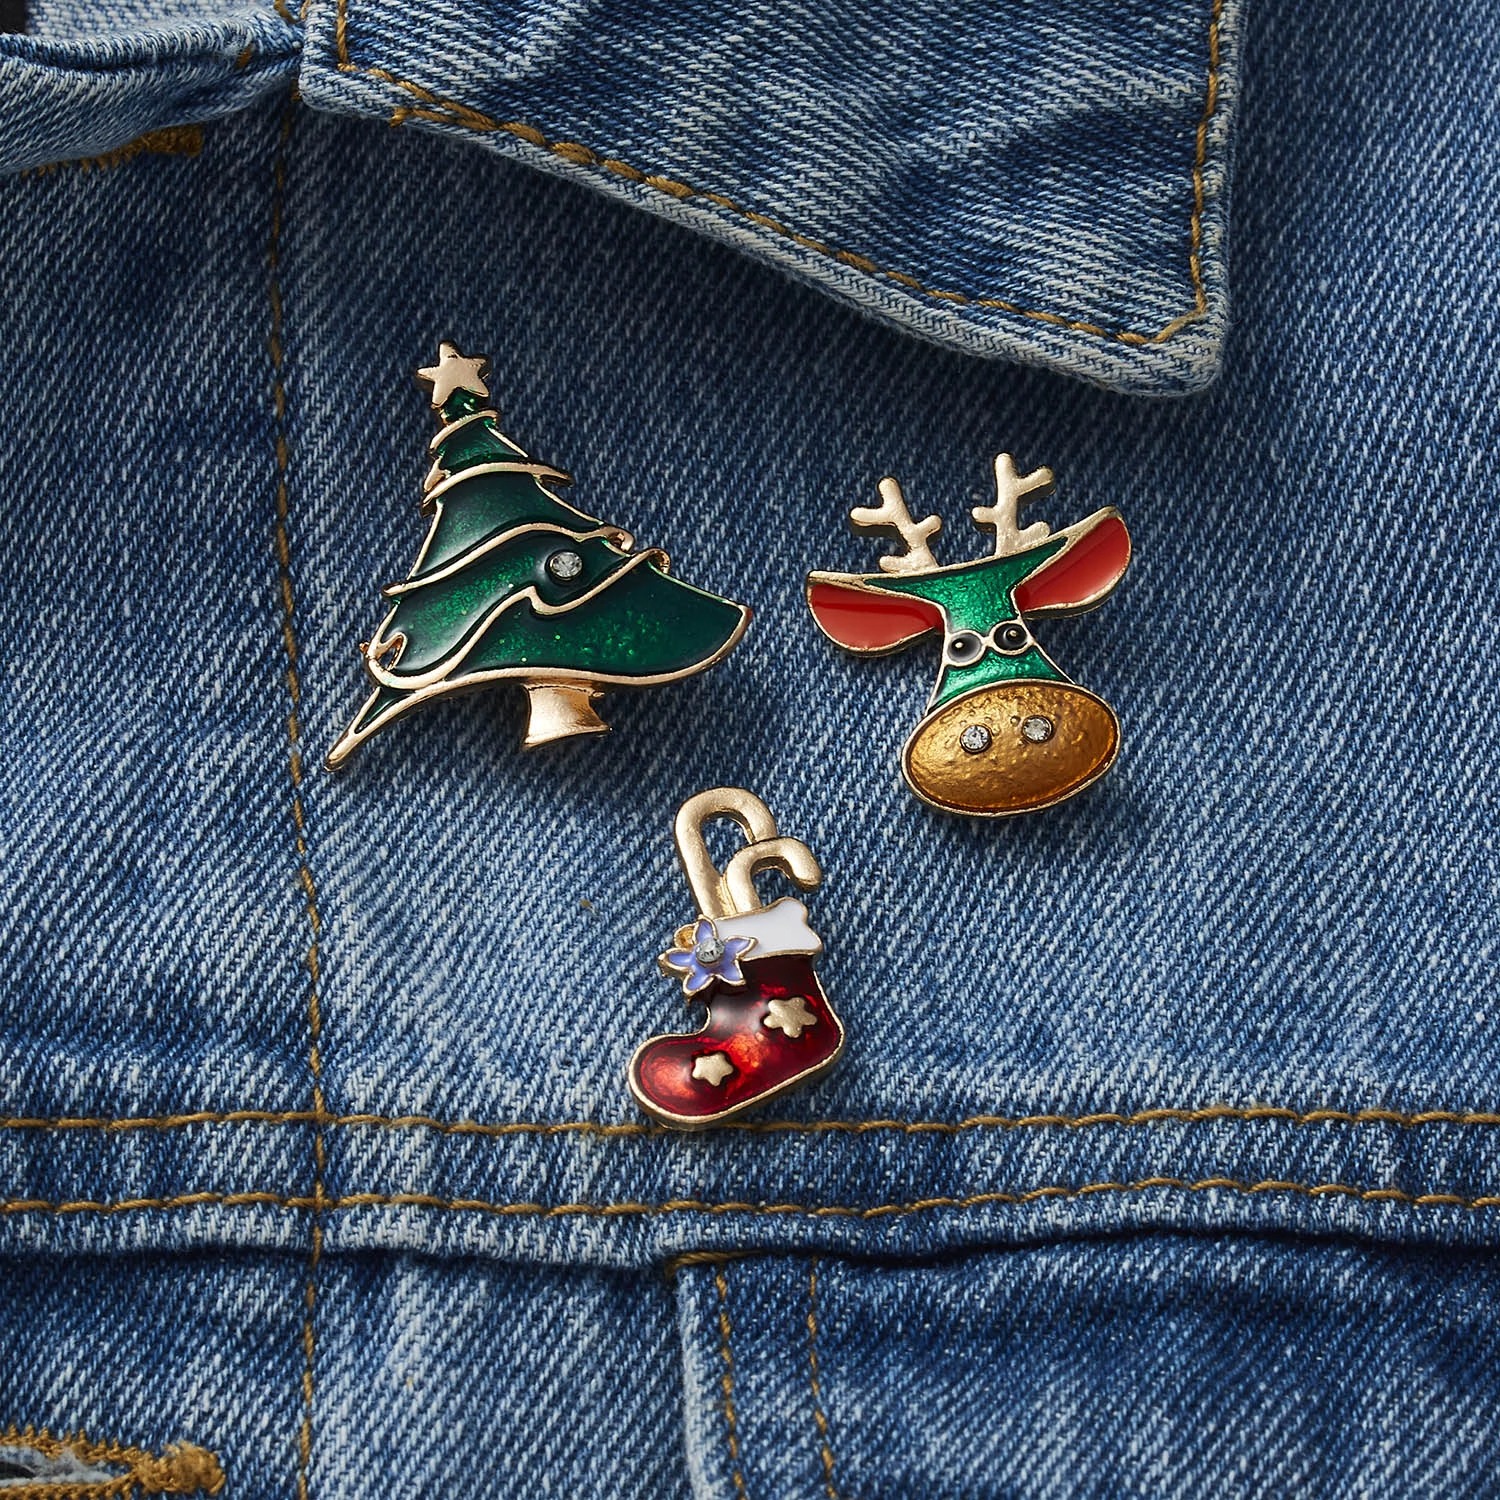 (🎅EARLY XMAS SALE - 50% OFF) 3 Piece Set Merry Christmas Brooches